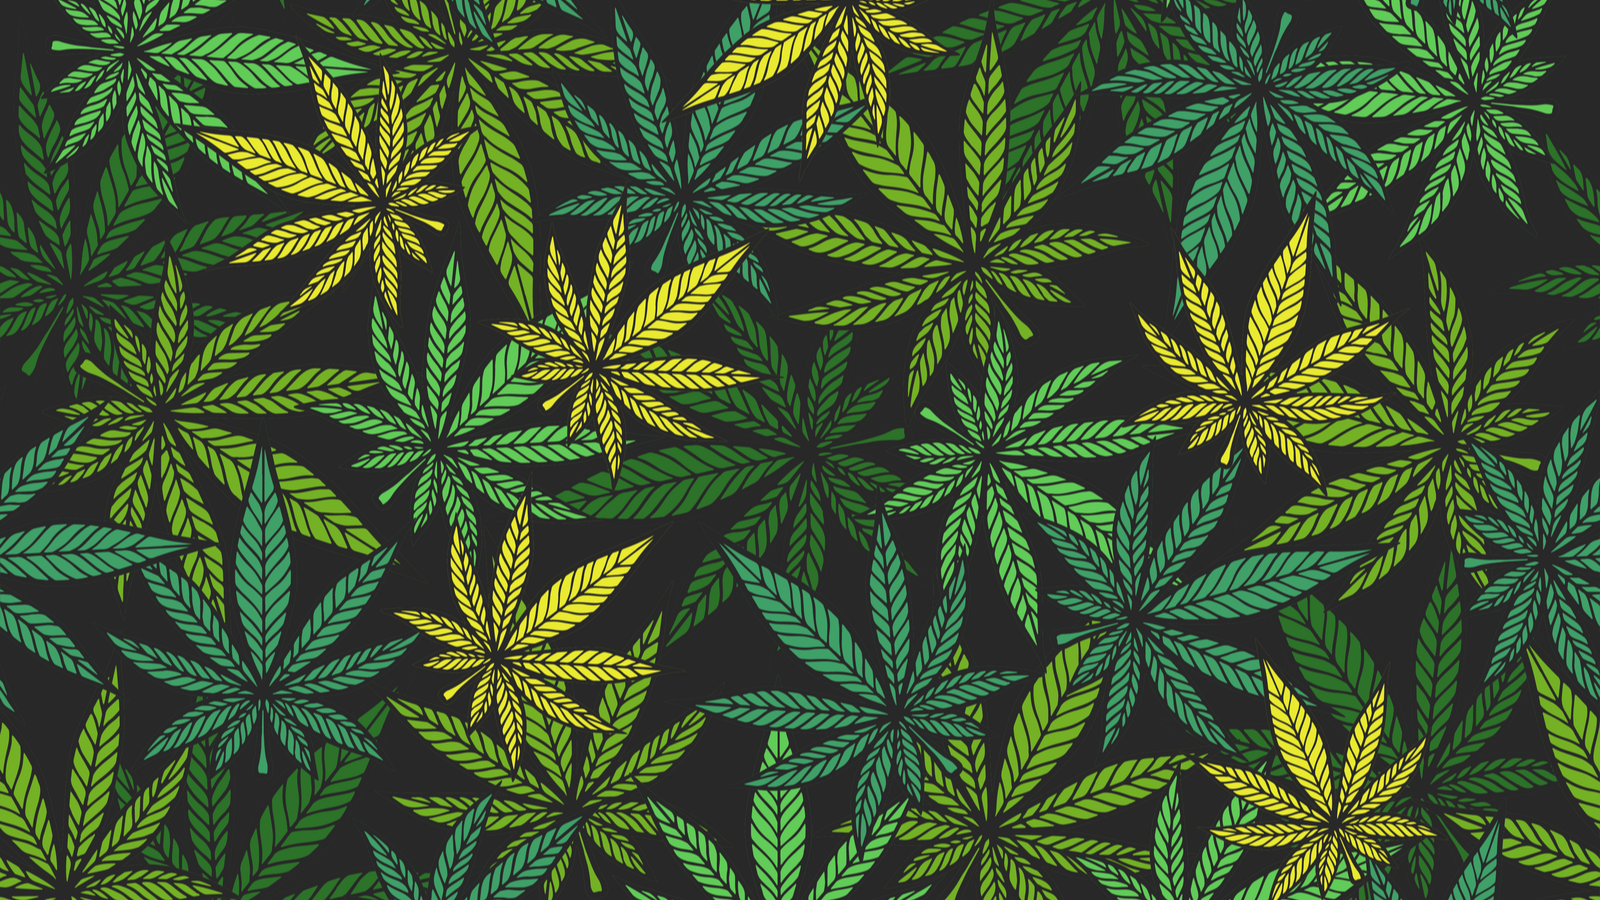 Marijuana leaves on various colors of green and yellow on top of a black background